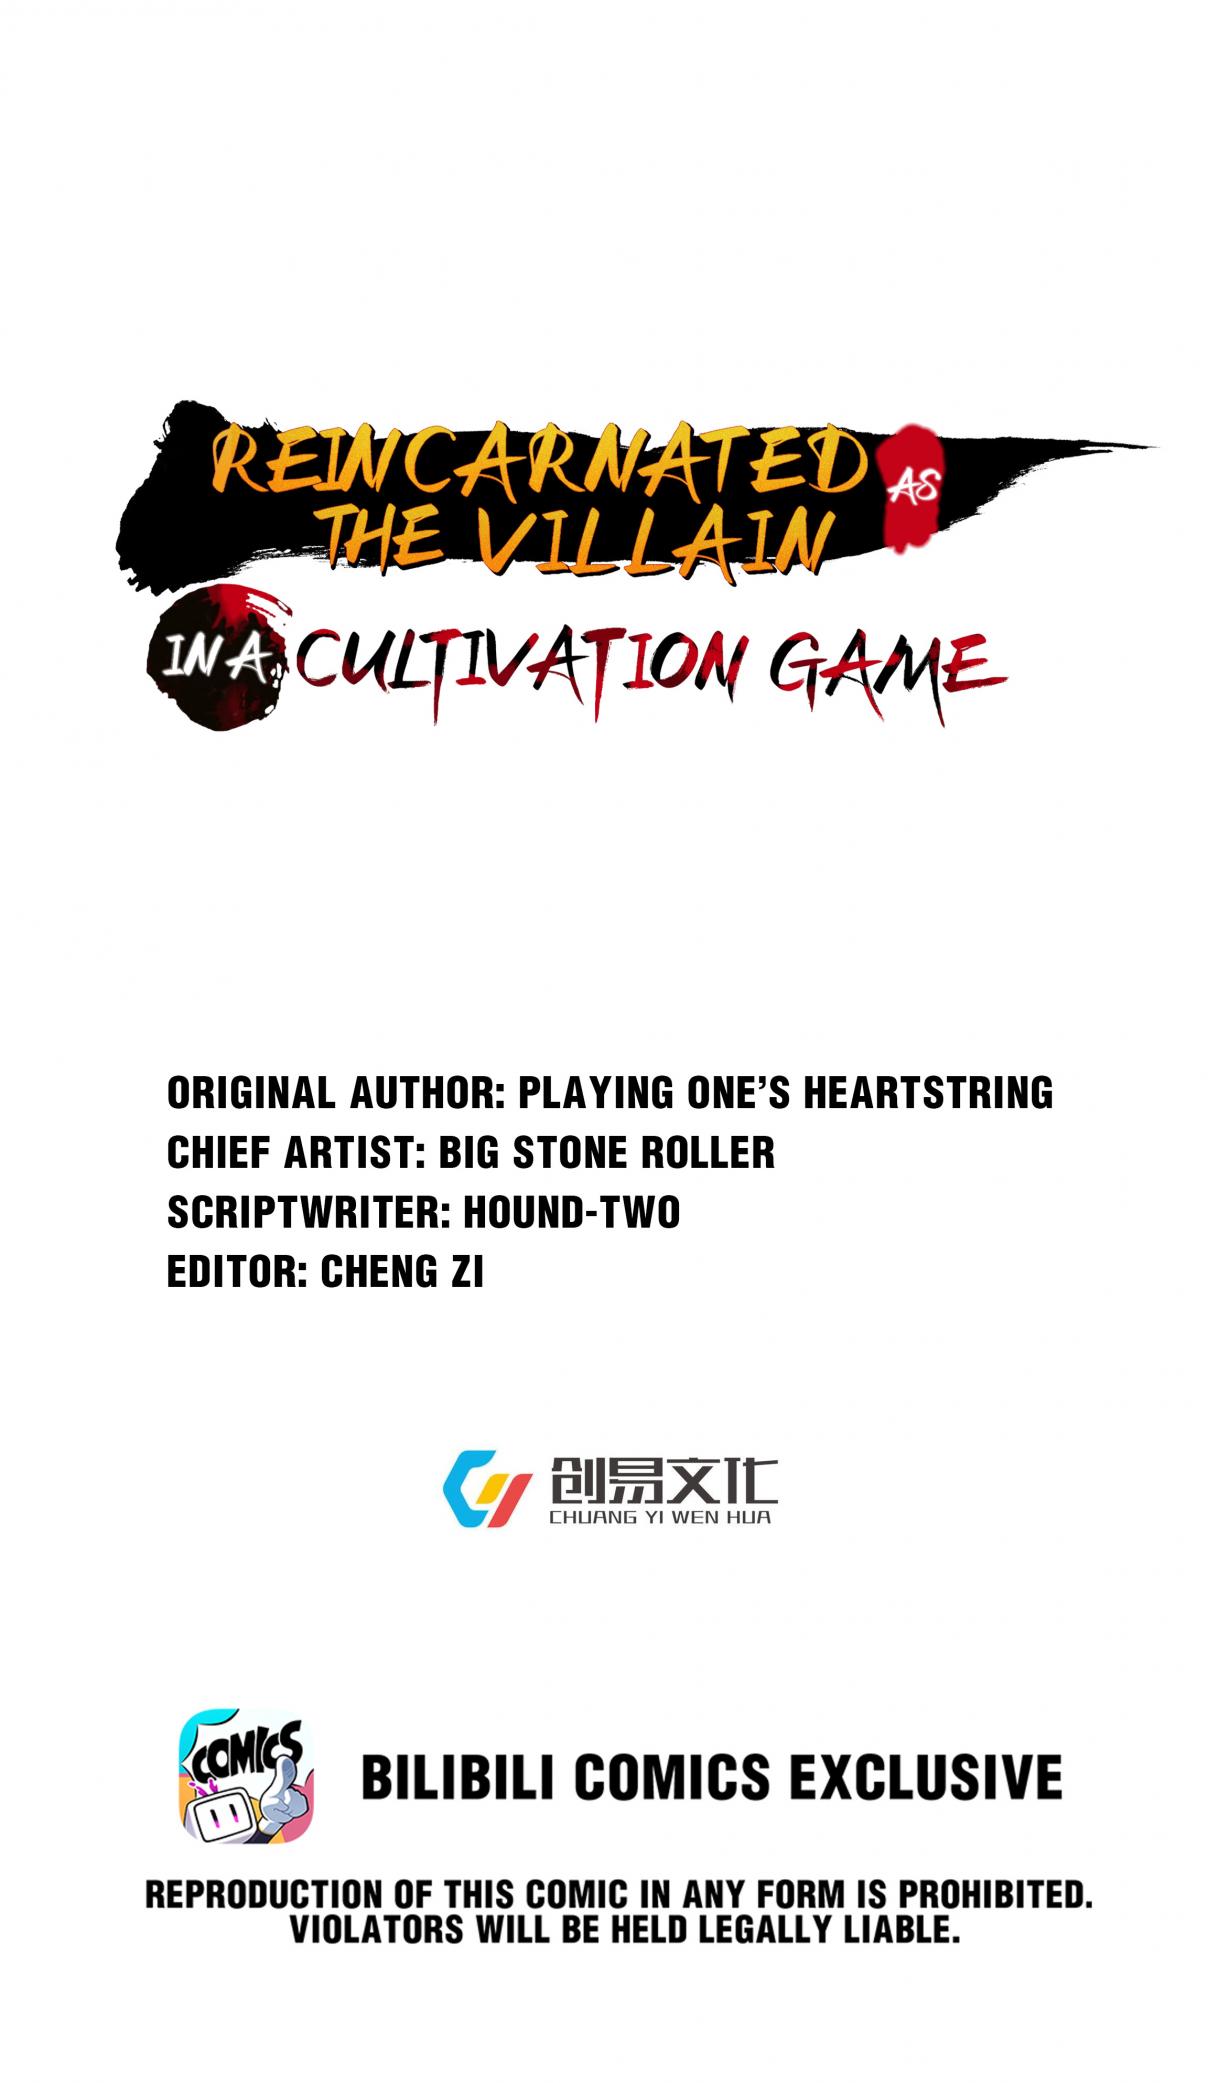 Reincarnated as the Villain in a Cultivation Game 45